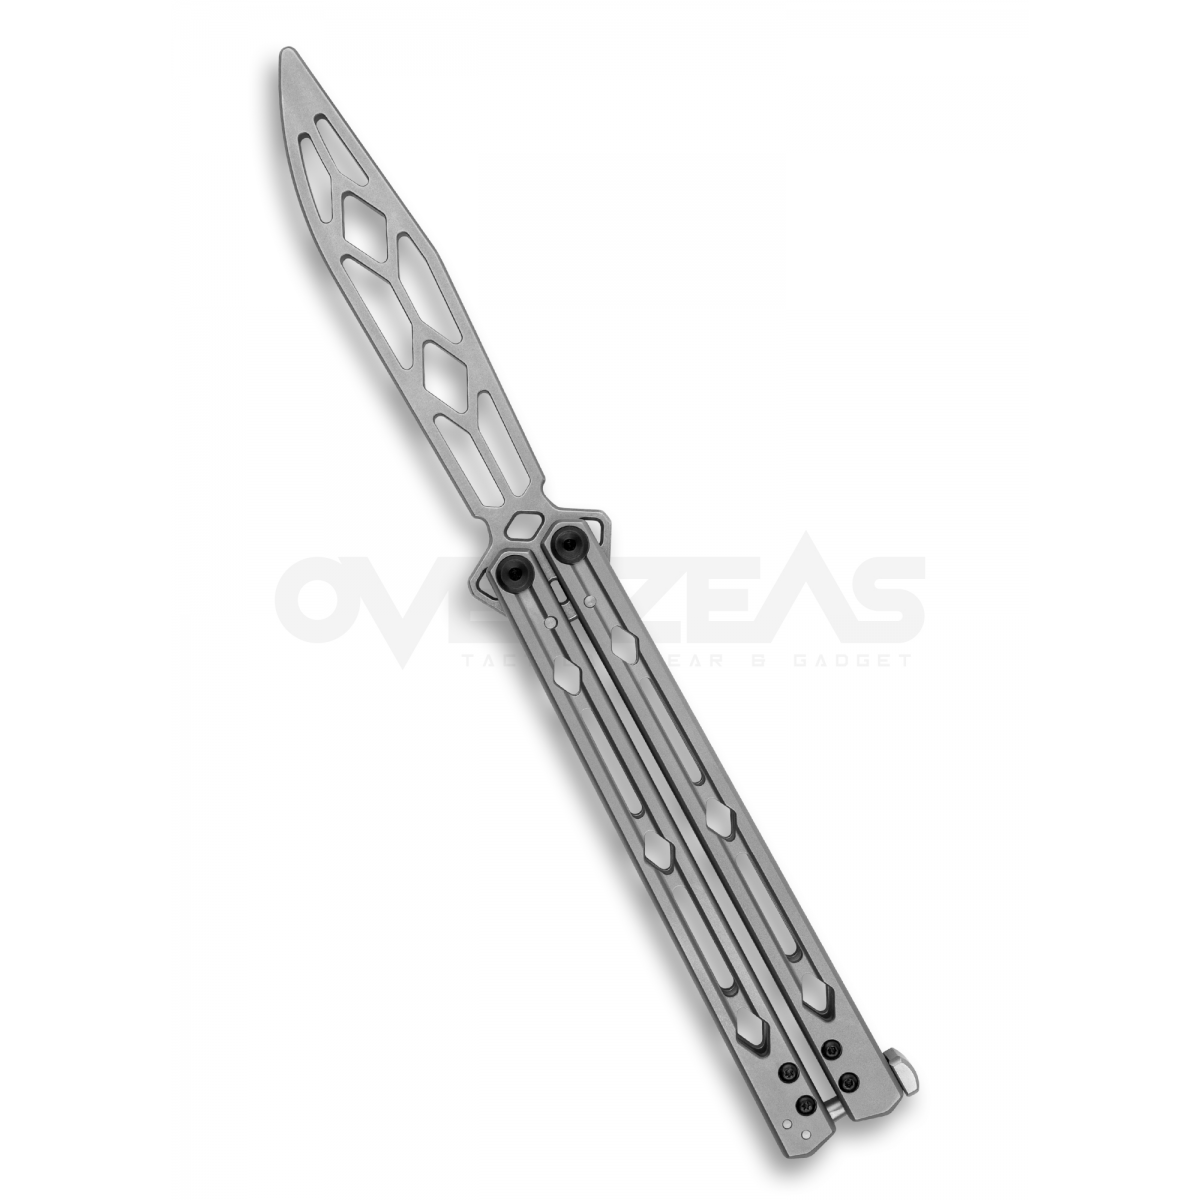 Kershaw Knives: Lucha Trainer - All Steel Butterfly Knife - 5150TR